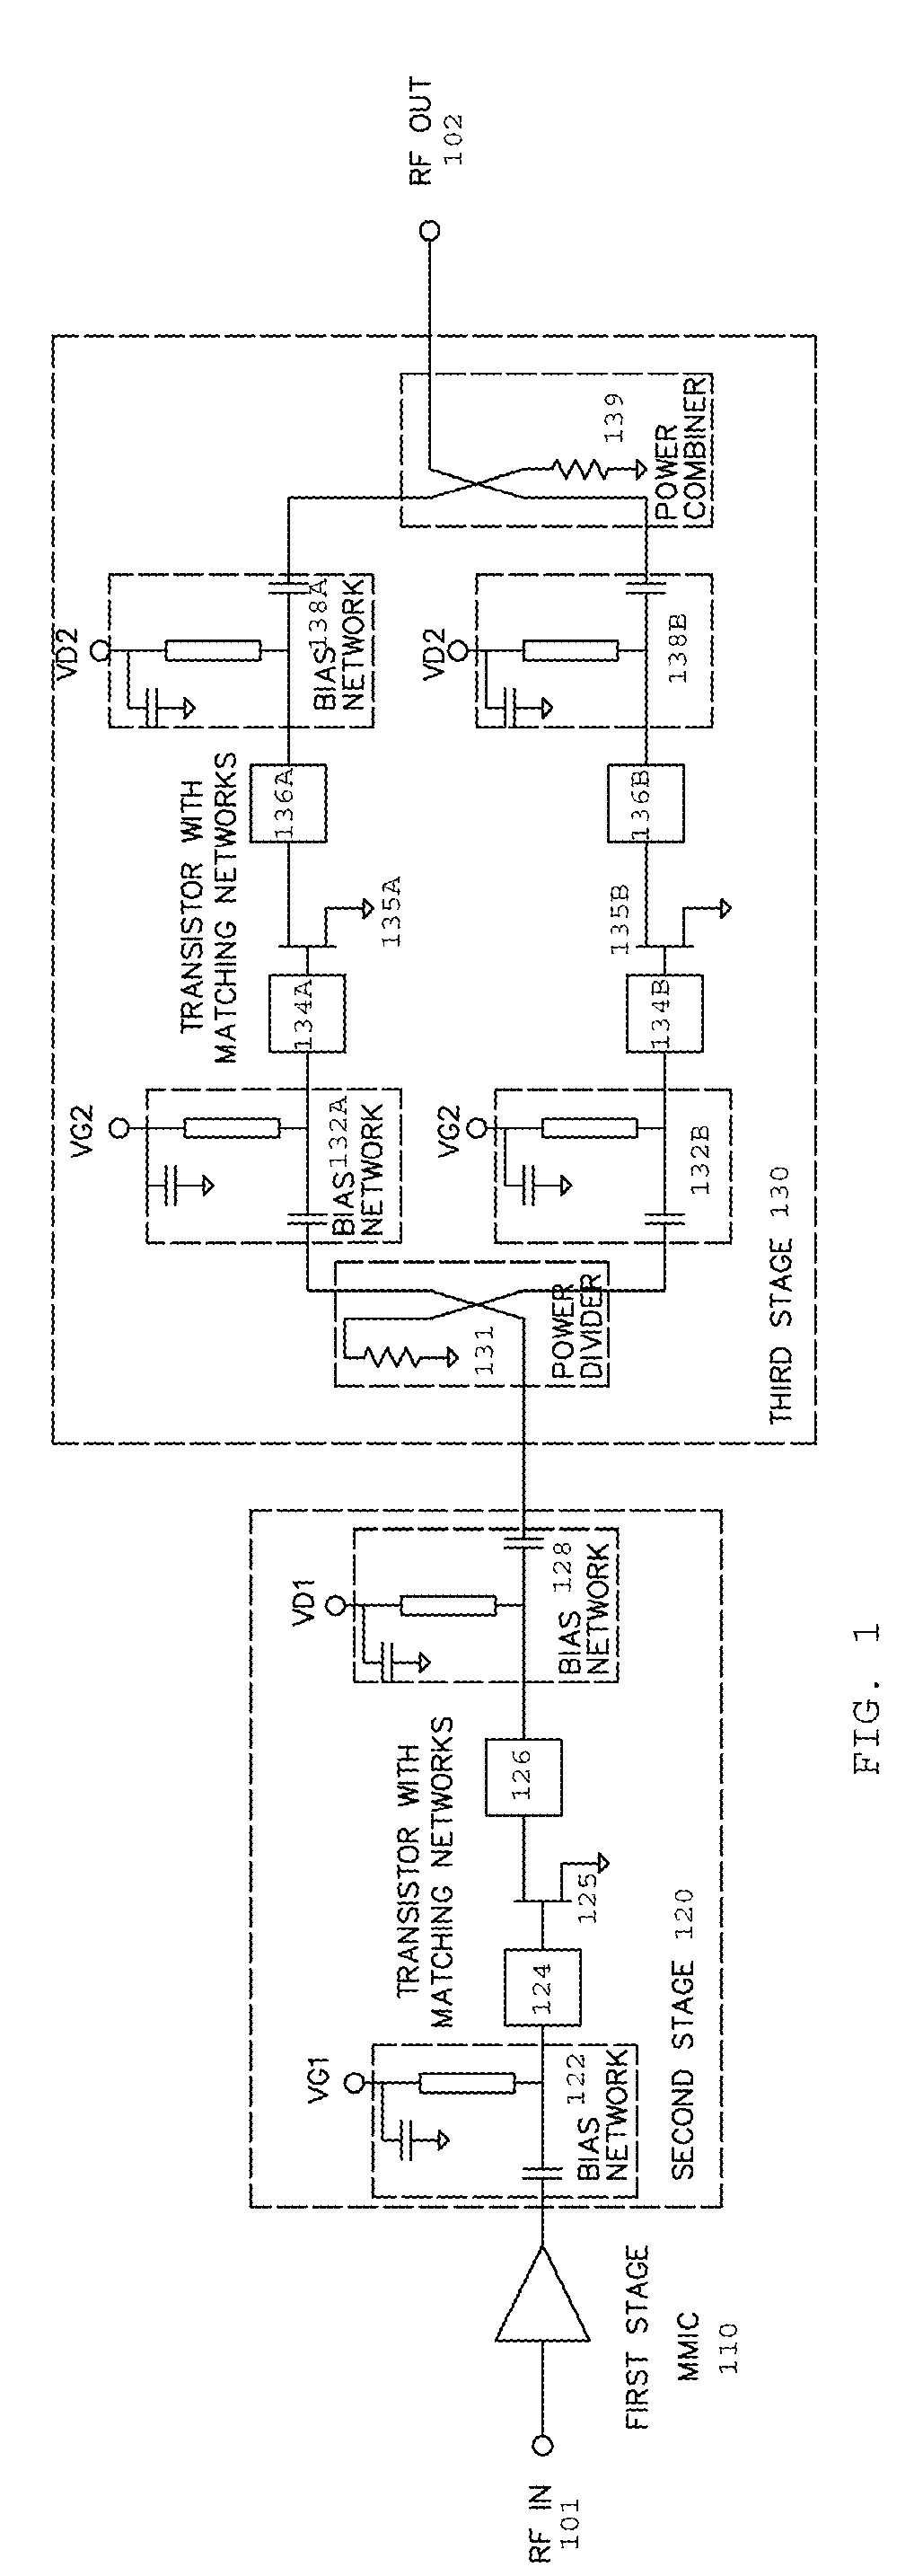 Multi-Stage RF Amplifier Including MMICs and Discrete Transistor Amplifiers in a Single Package